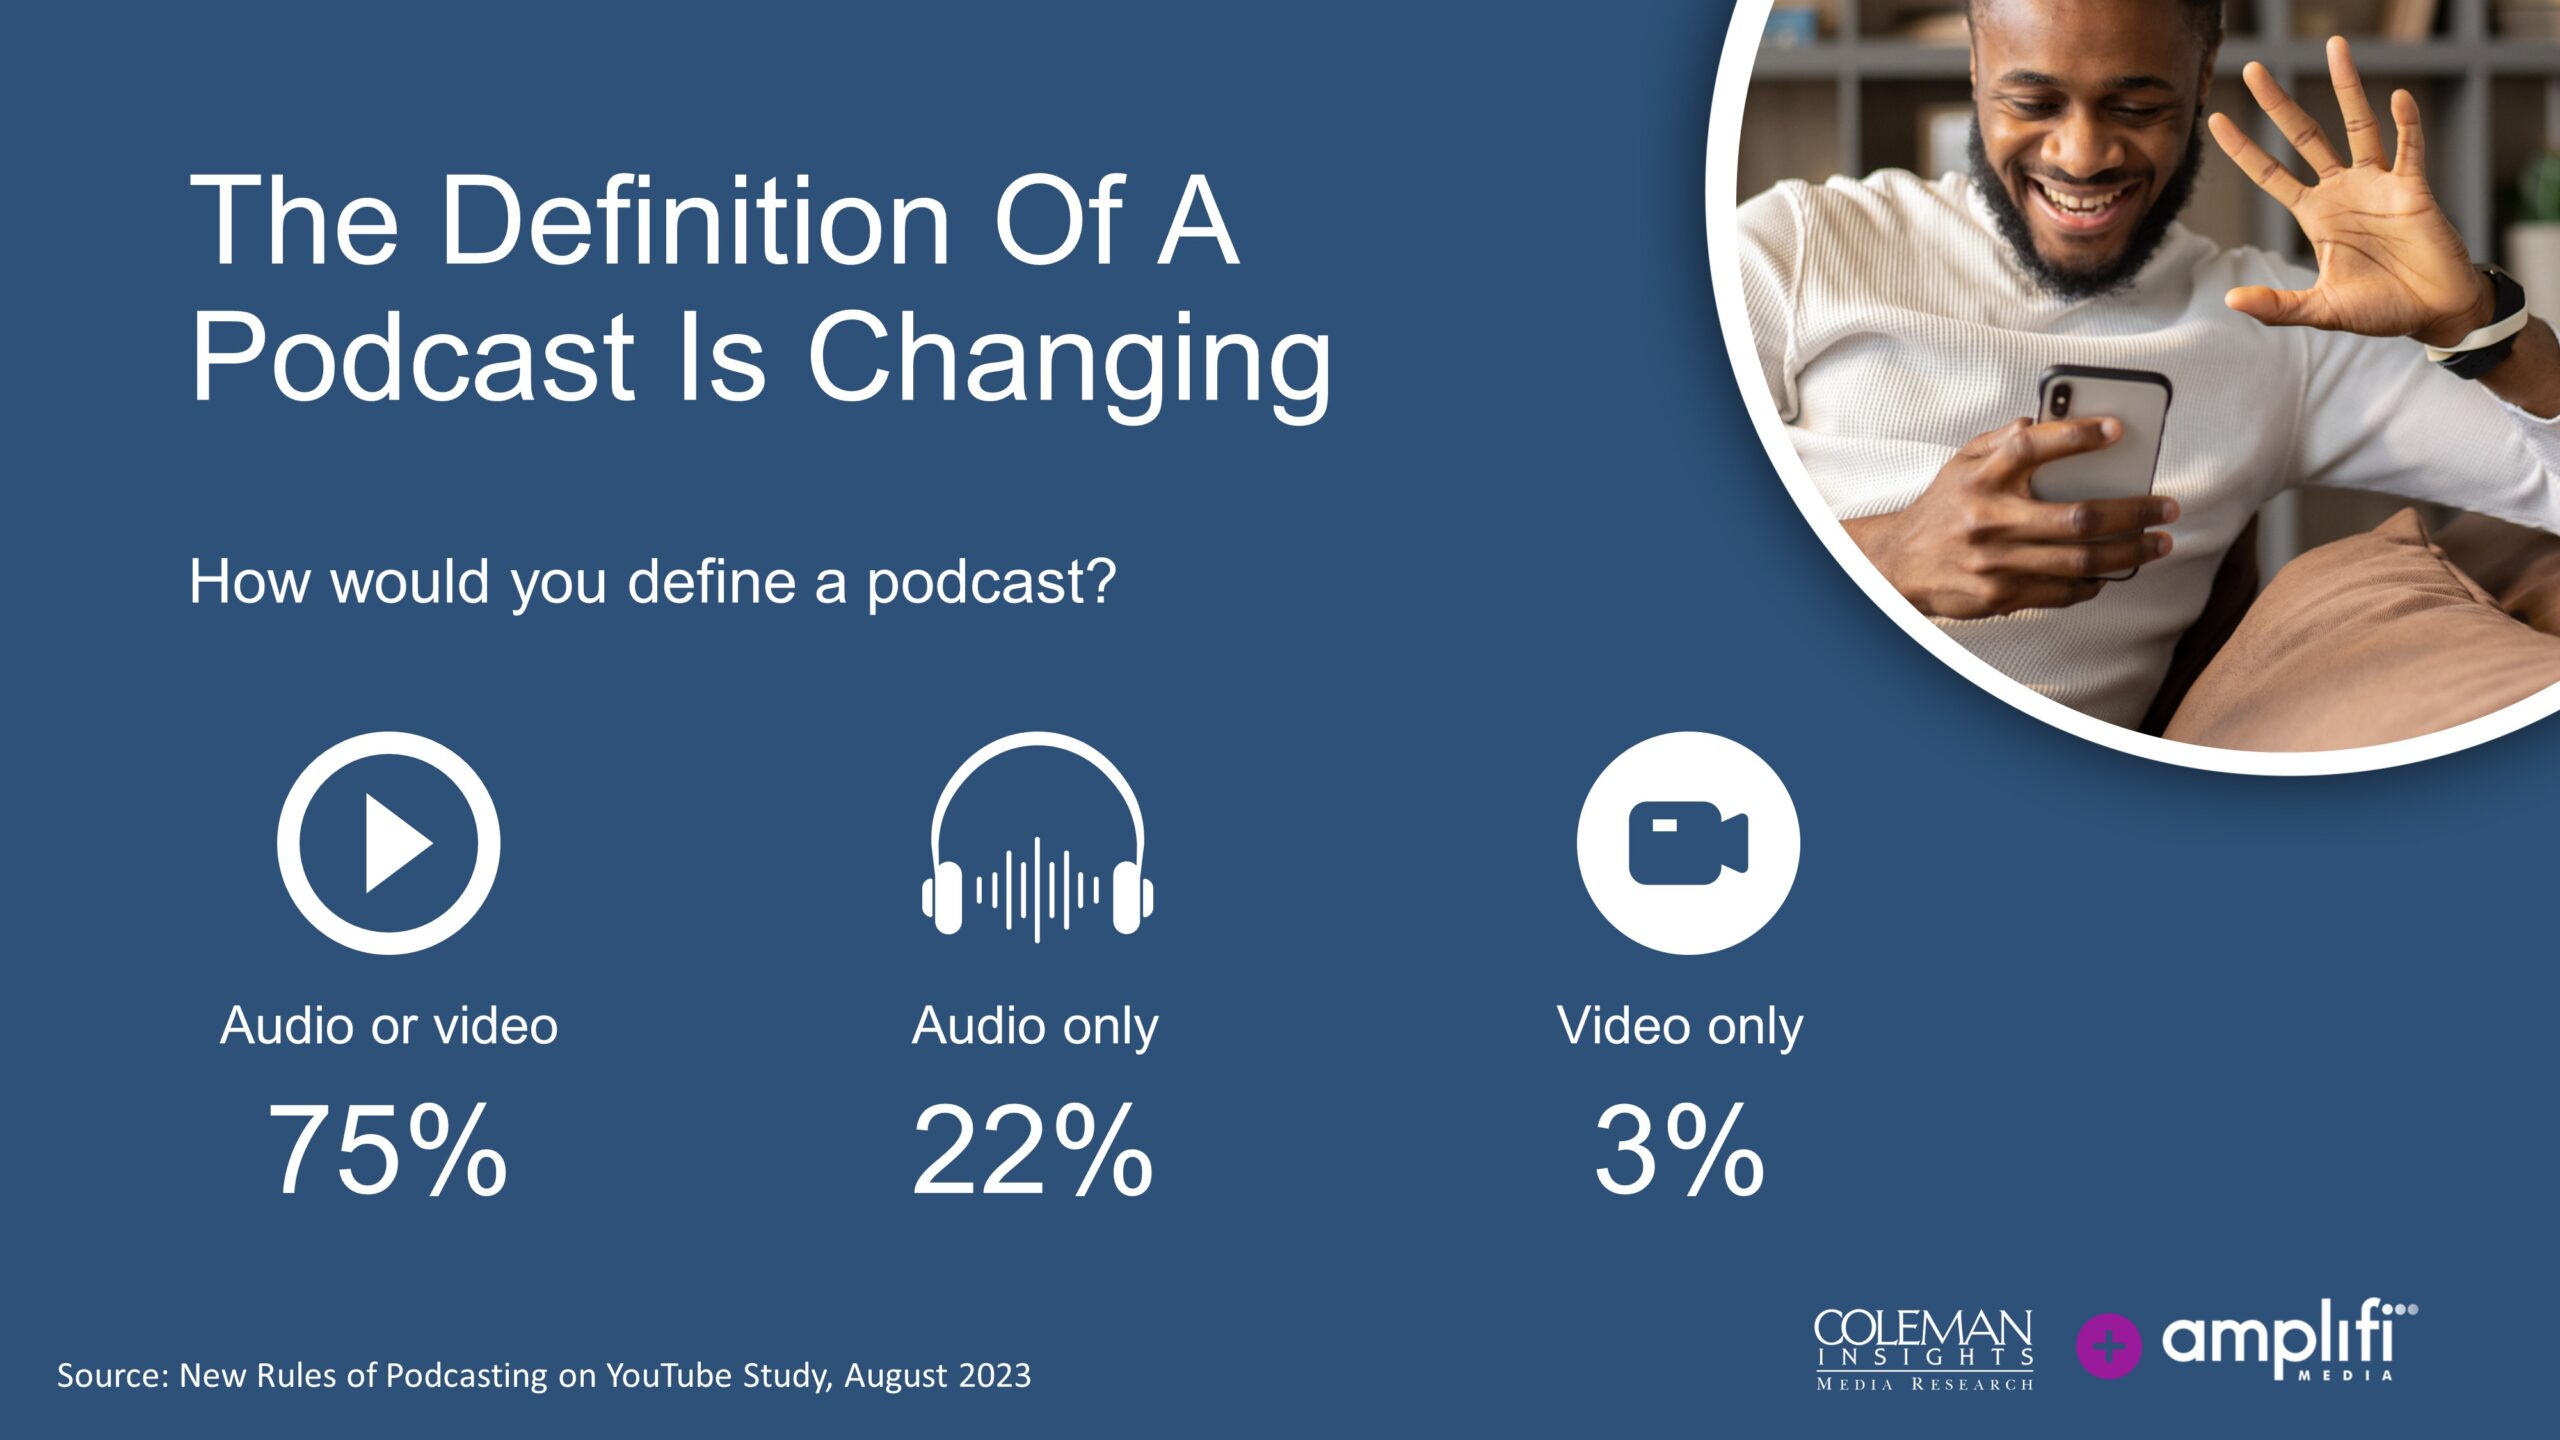 A Podcast is Audio or Video. The Customer Says So.